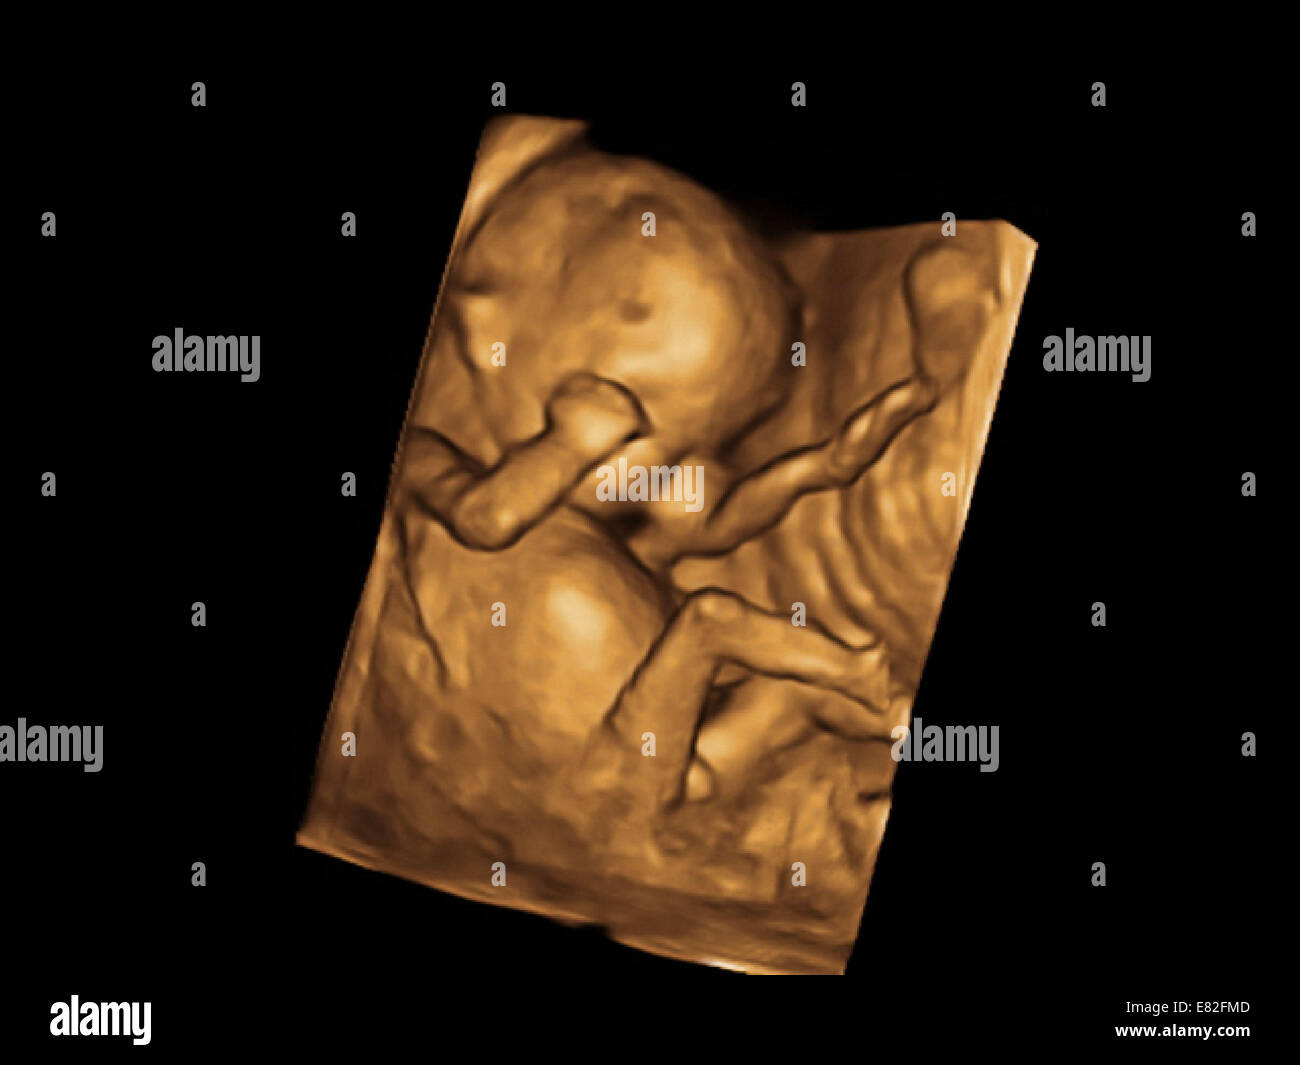 12 week 3d ultrasound pictures